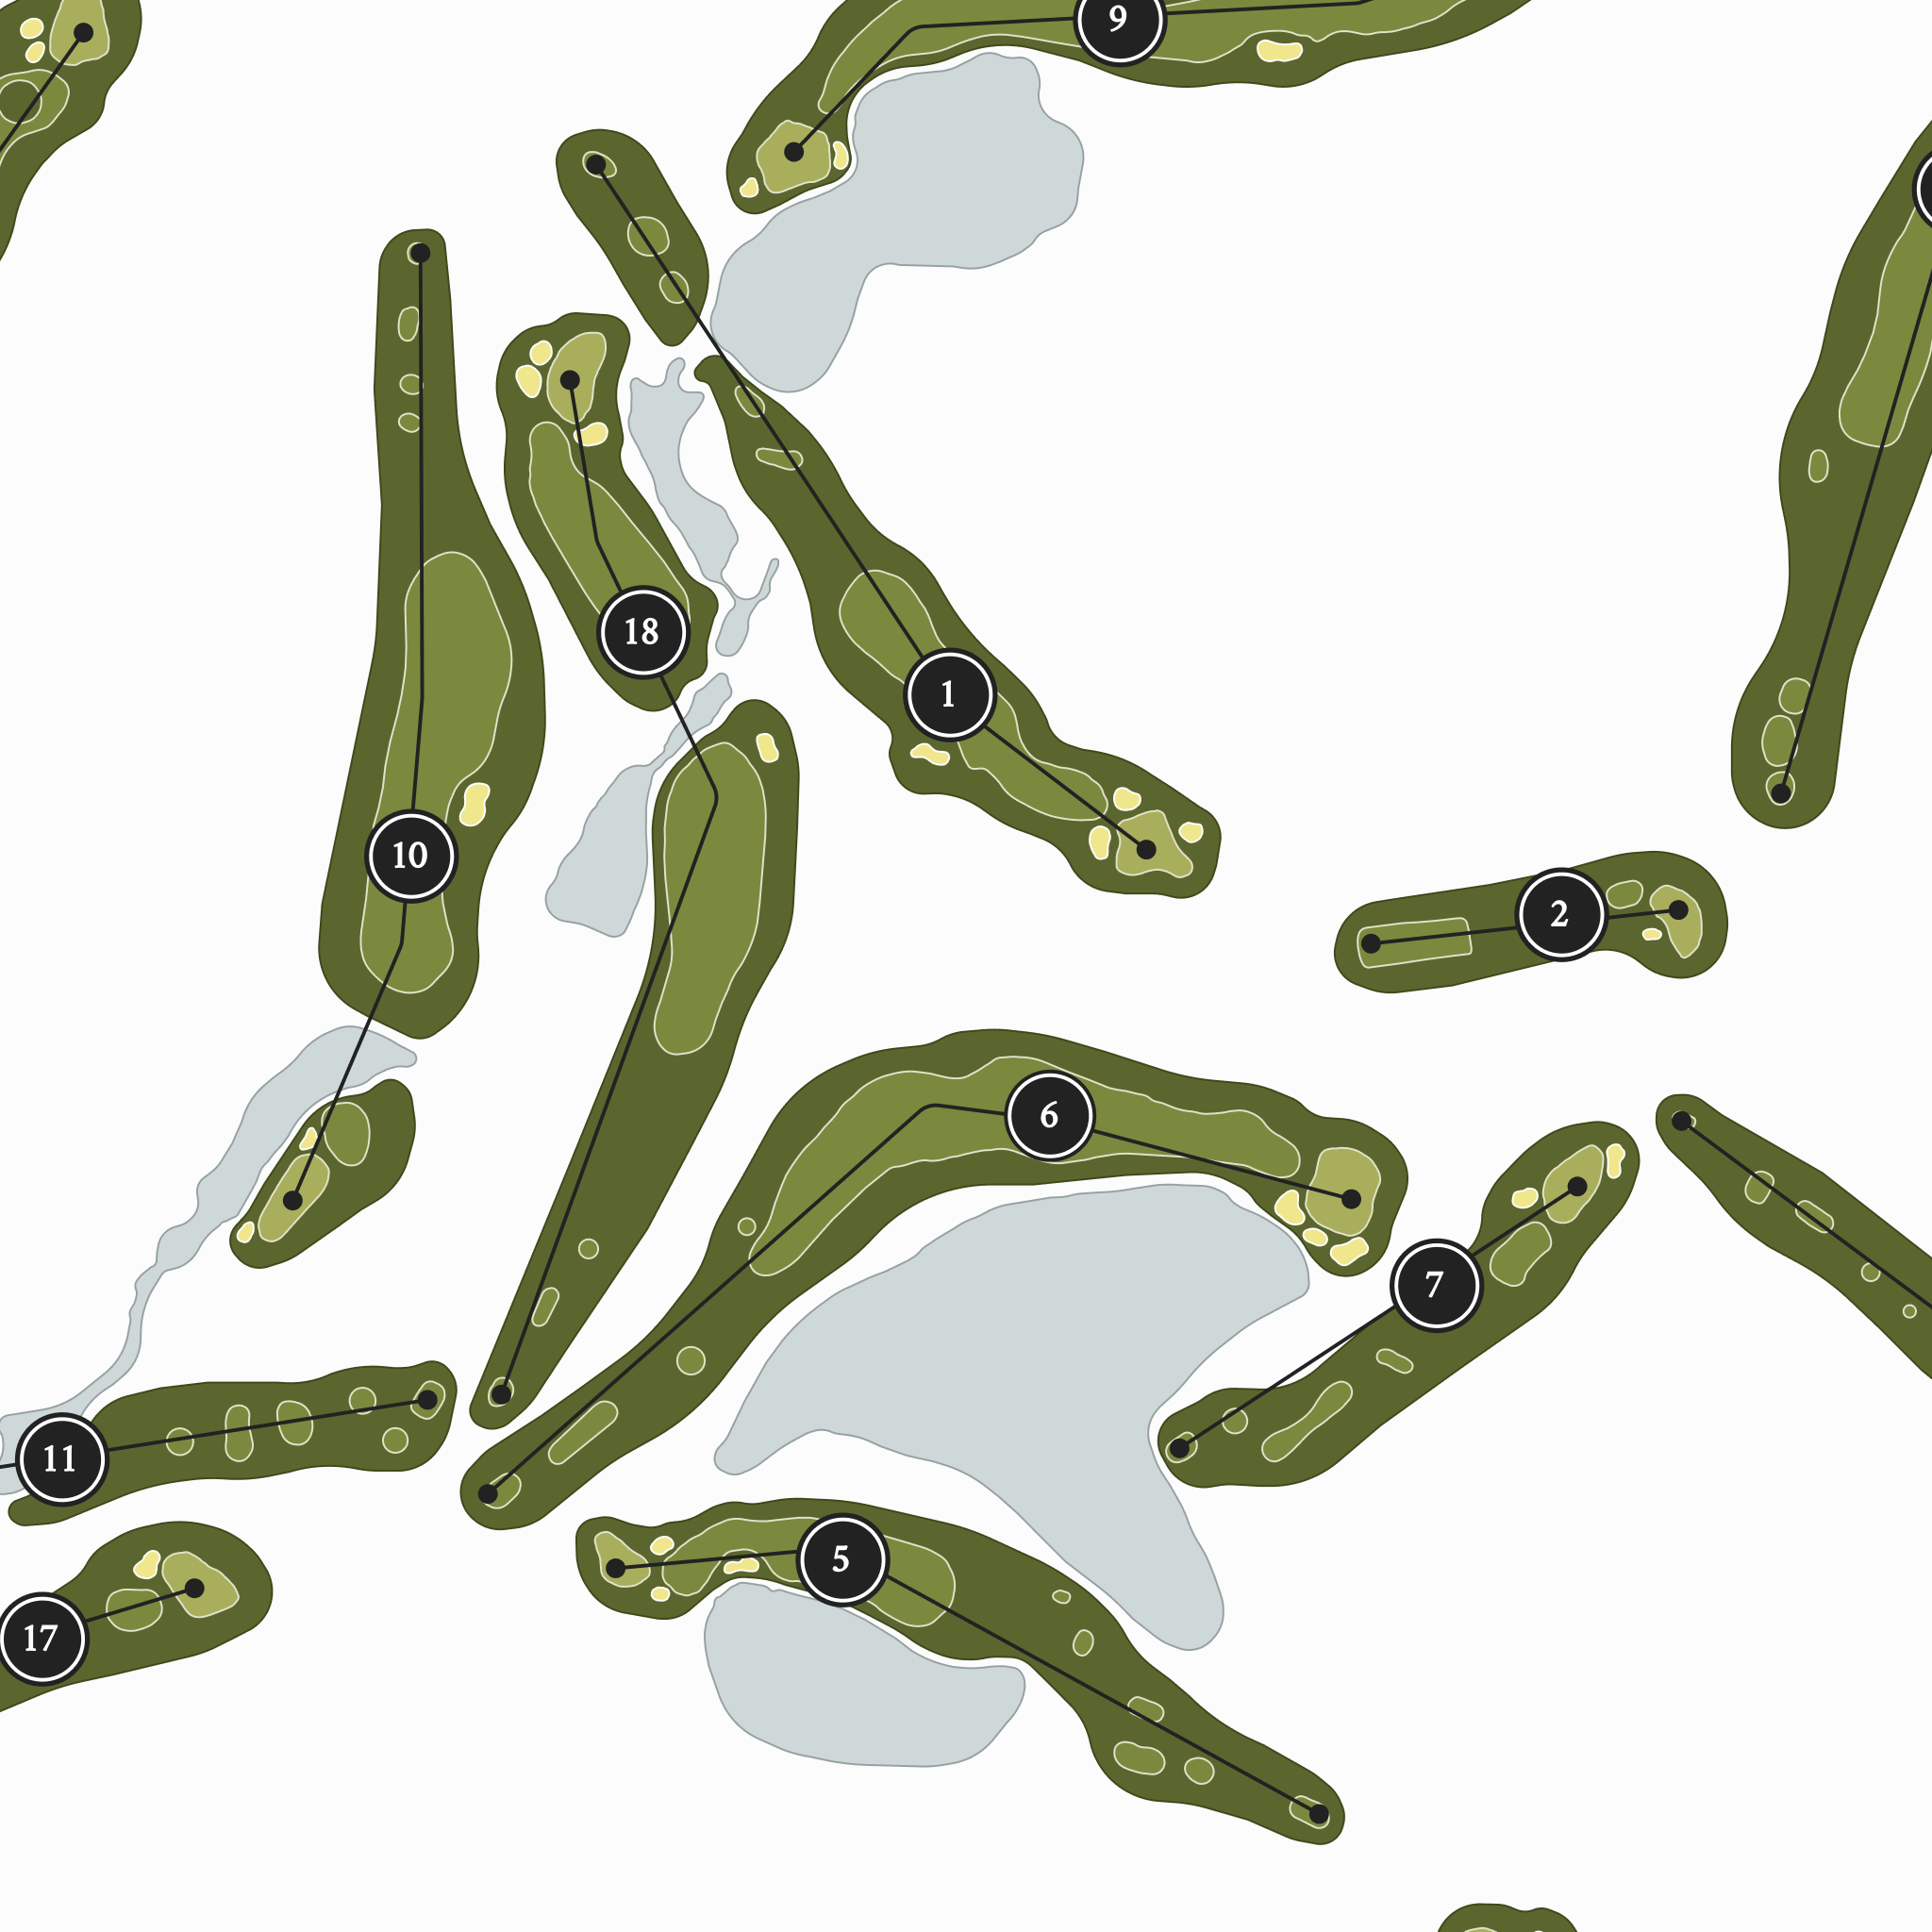 Horseshoe Bend Country Club| Golf Course Print | Close Up With Hole Numbers #hole numbers_yes